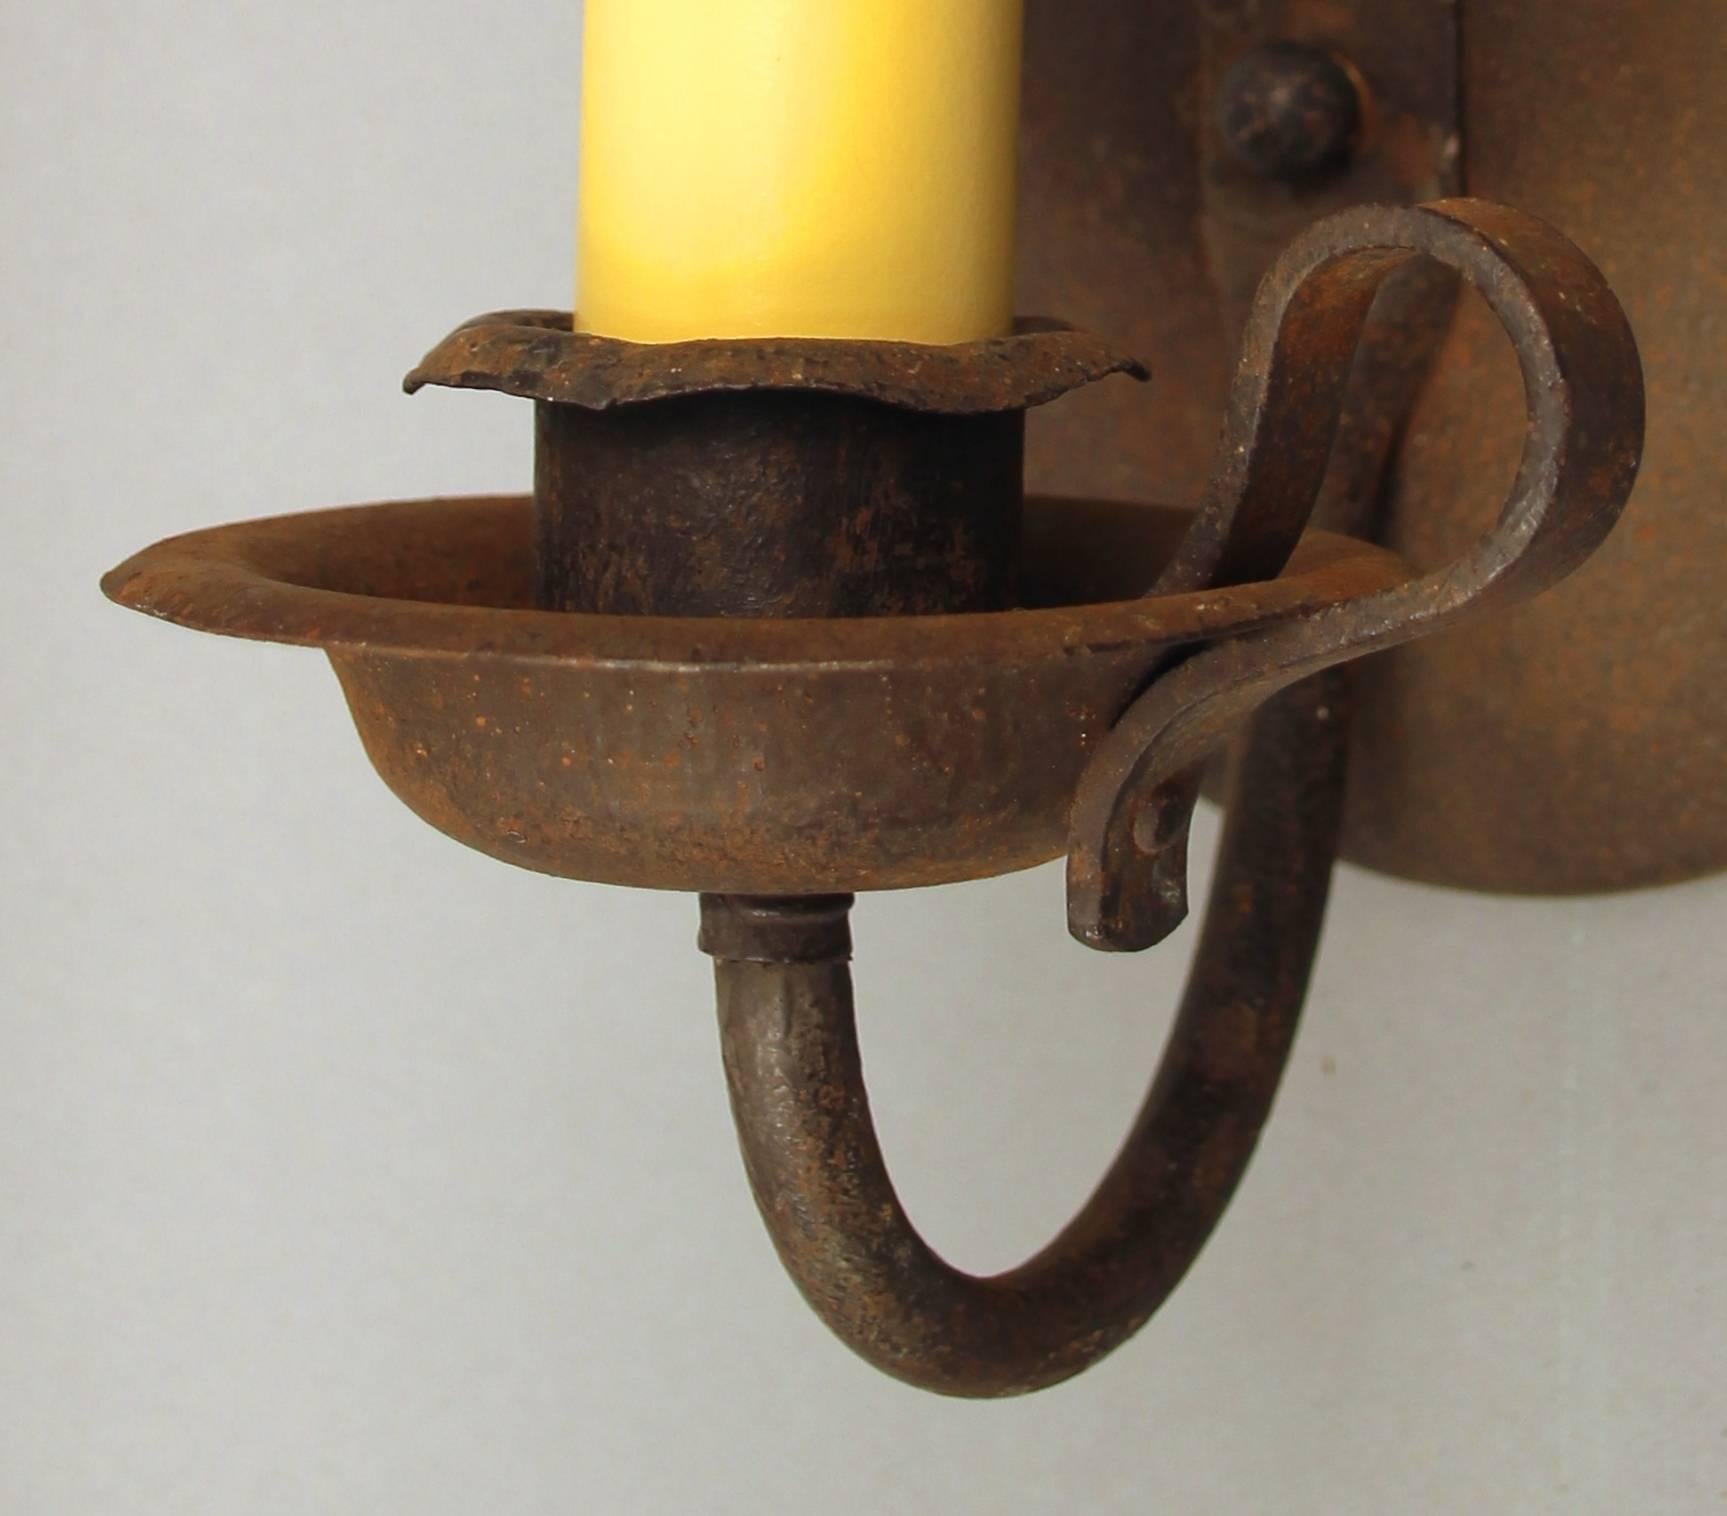 Simple 1920s wrought iron single light sconces. Perfect for Monterey or Spanish Revival homes.